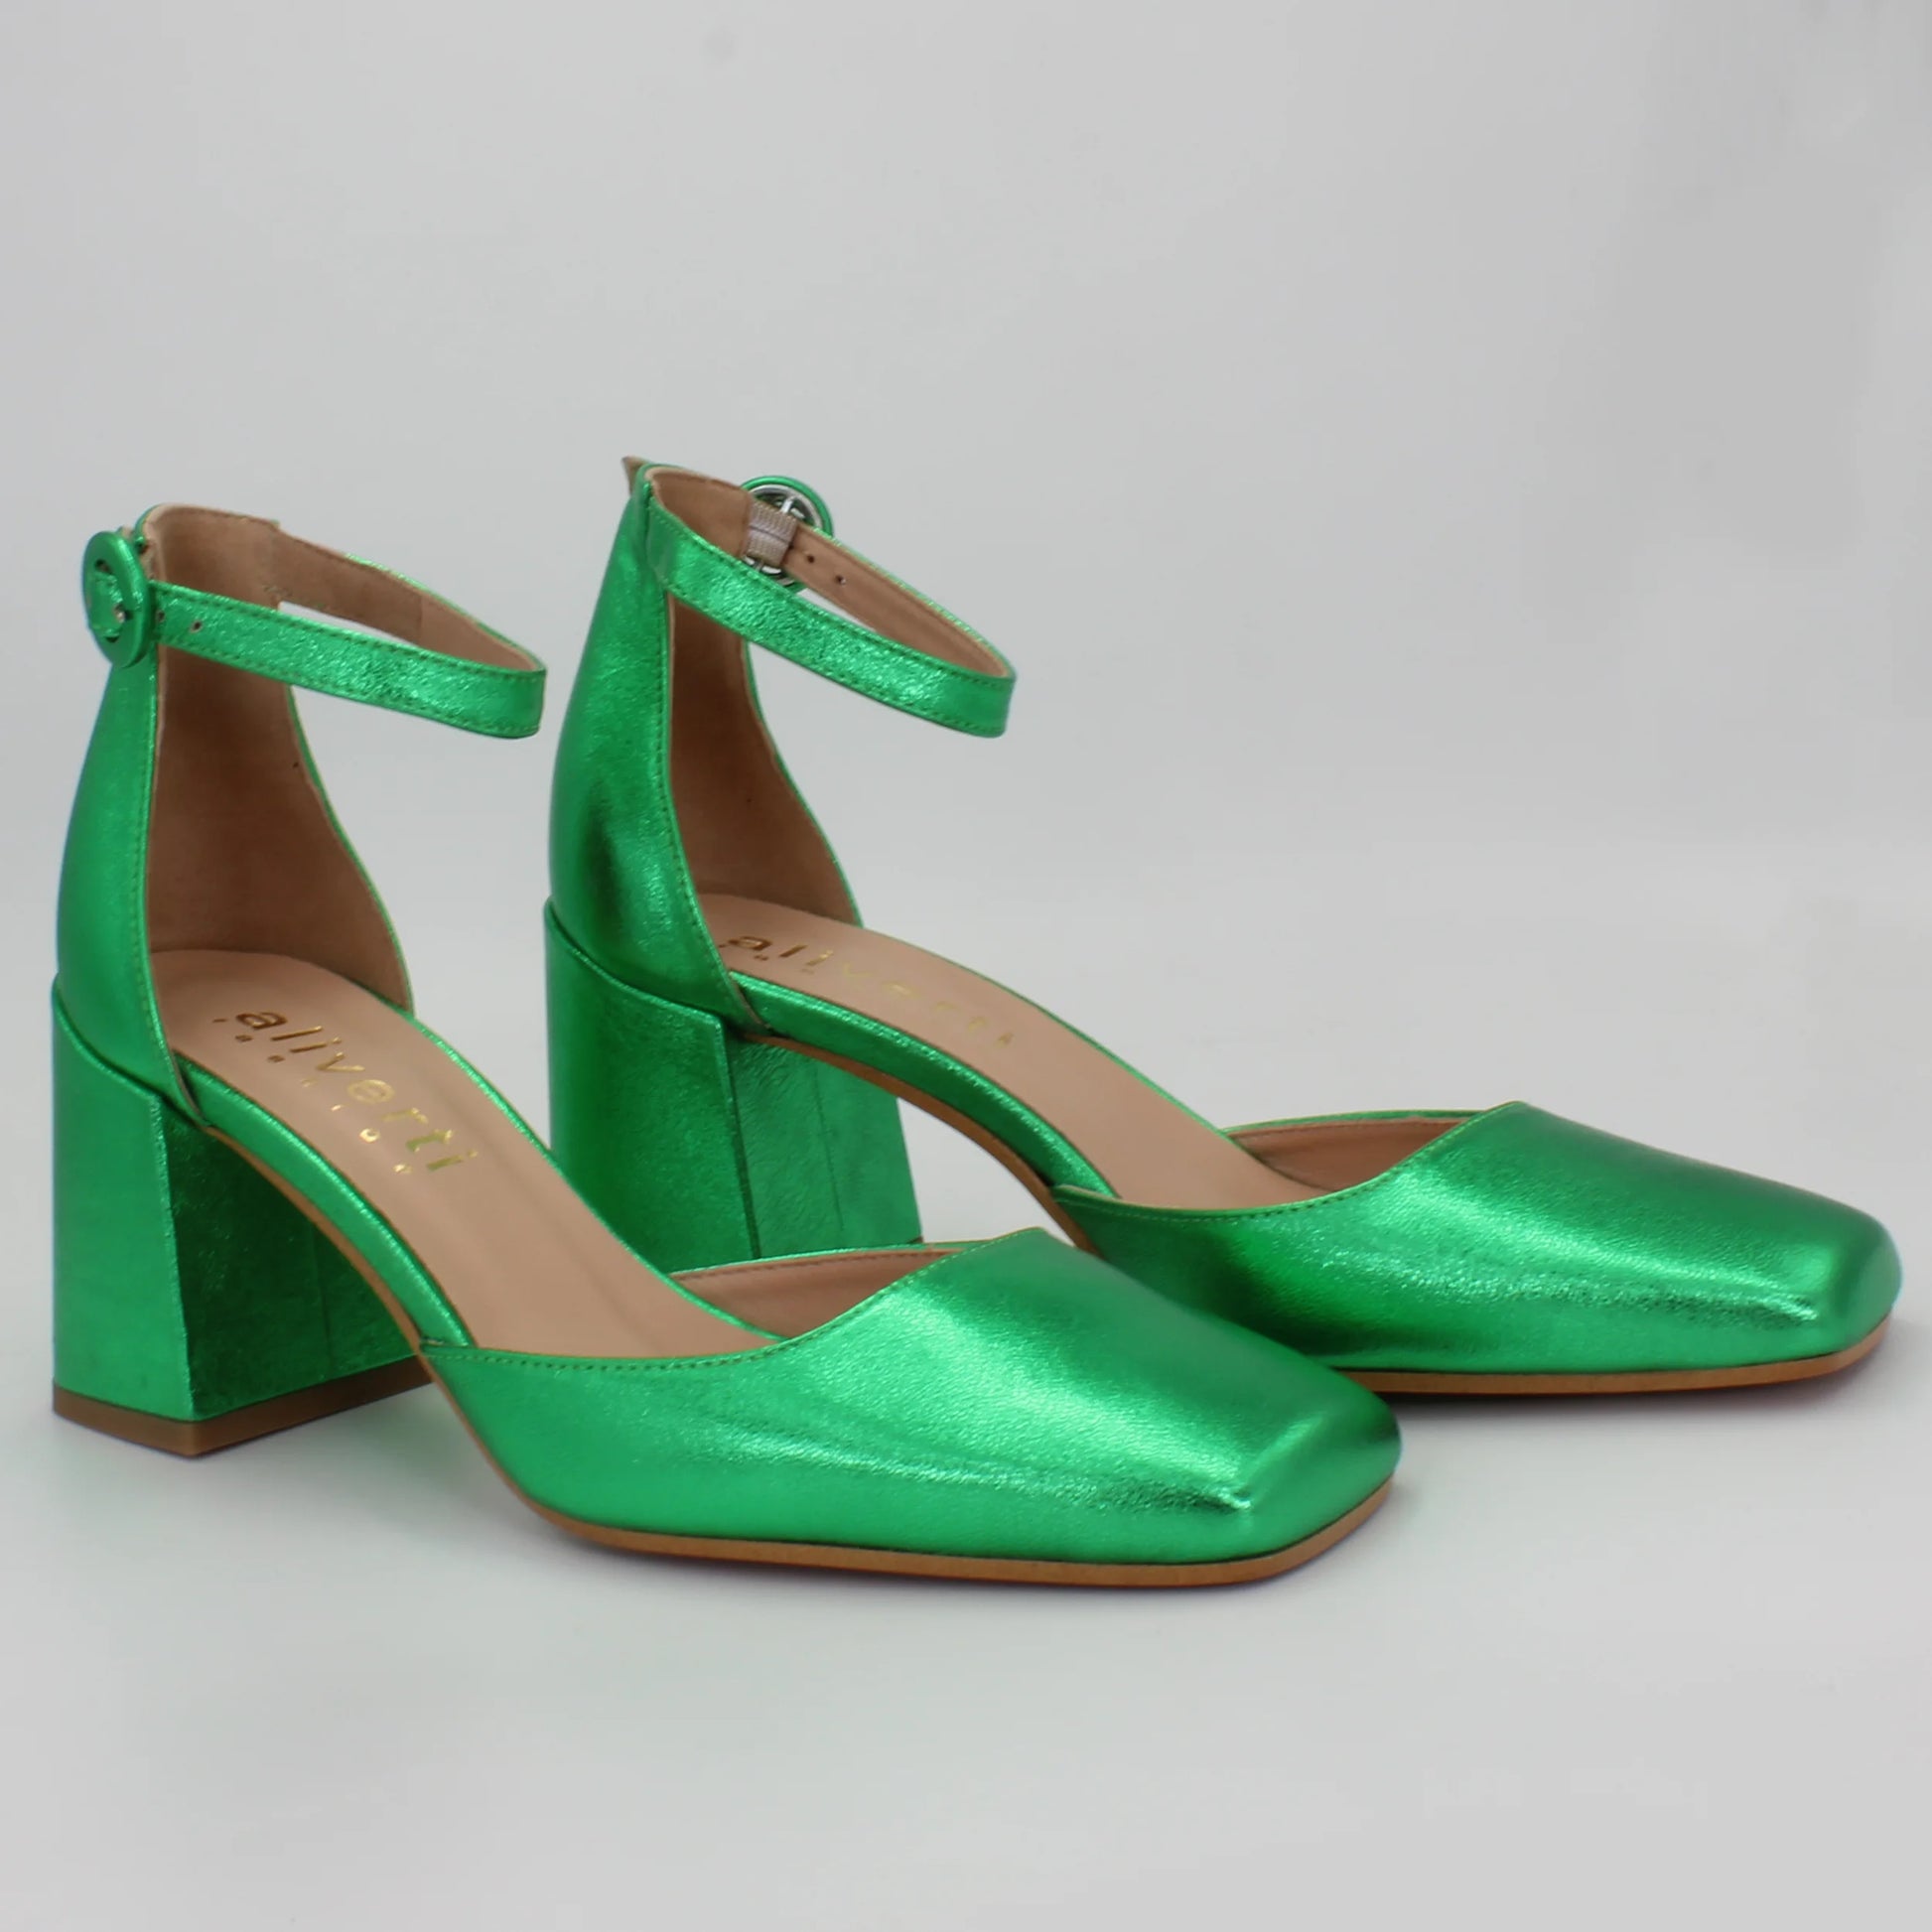 Shop Handmade Italian Leather block heel in verde laminato (SACHA7) or browse our range of hand-made Italian shoes in leather or suede in-store at Aliverti Cape Town, or shop online. We deliver in South Africa & offer multiple payment plans as well as accept multiple safe & secure payment methods.